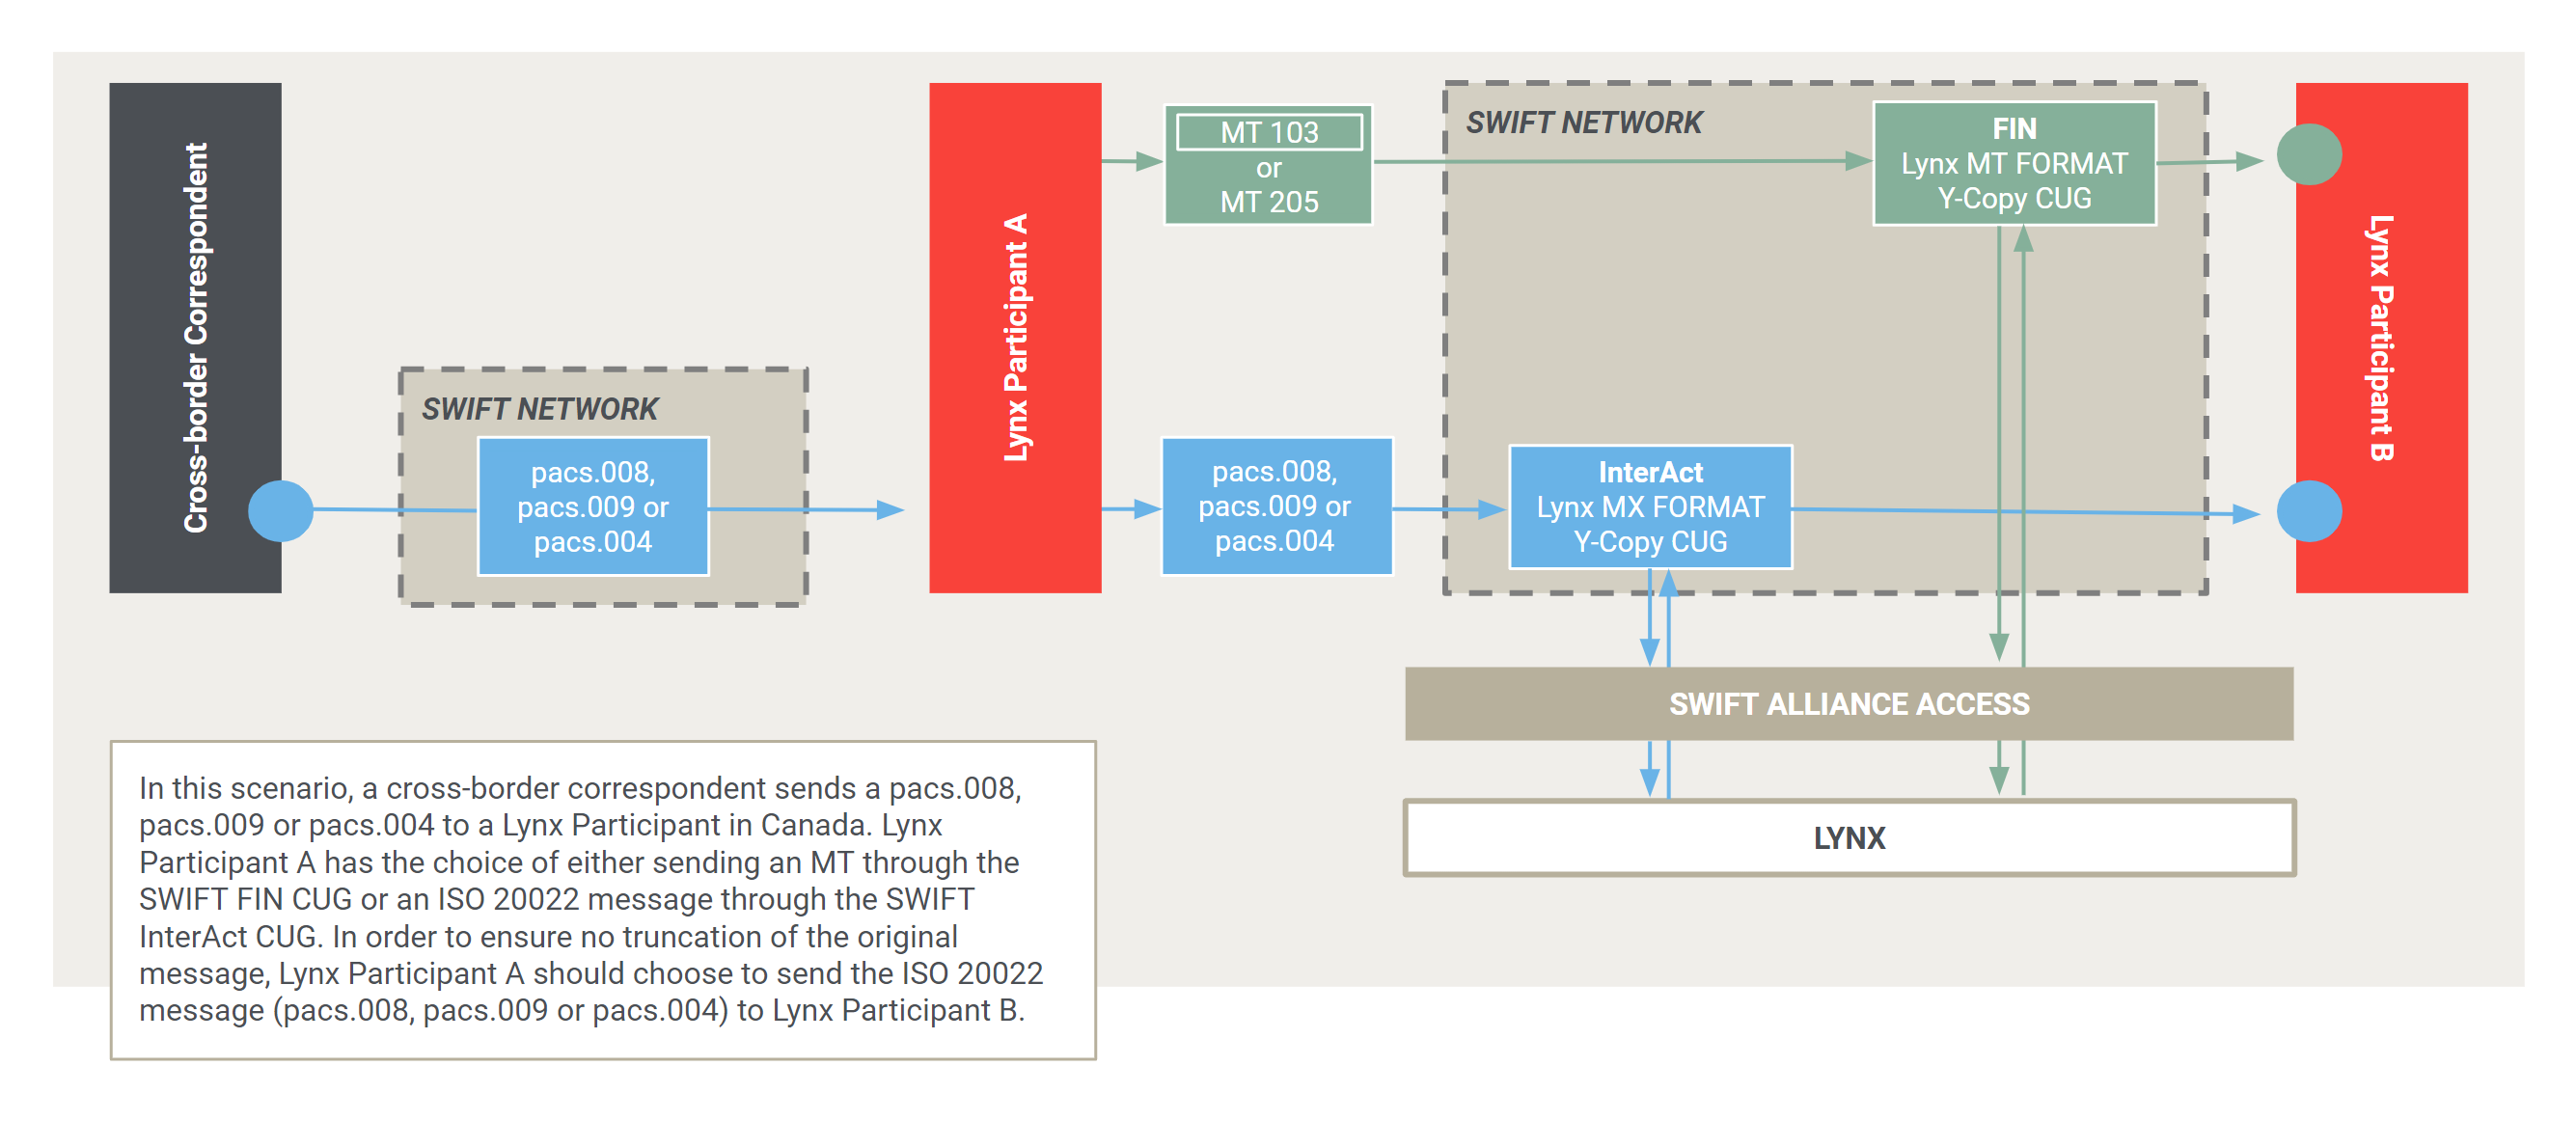 Lynx release two (MT or ISO 20022) diagram